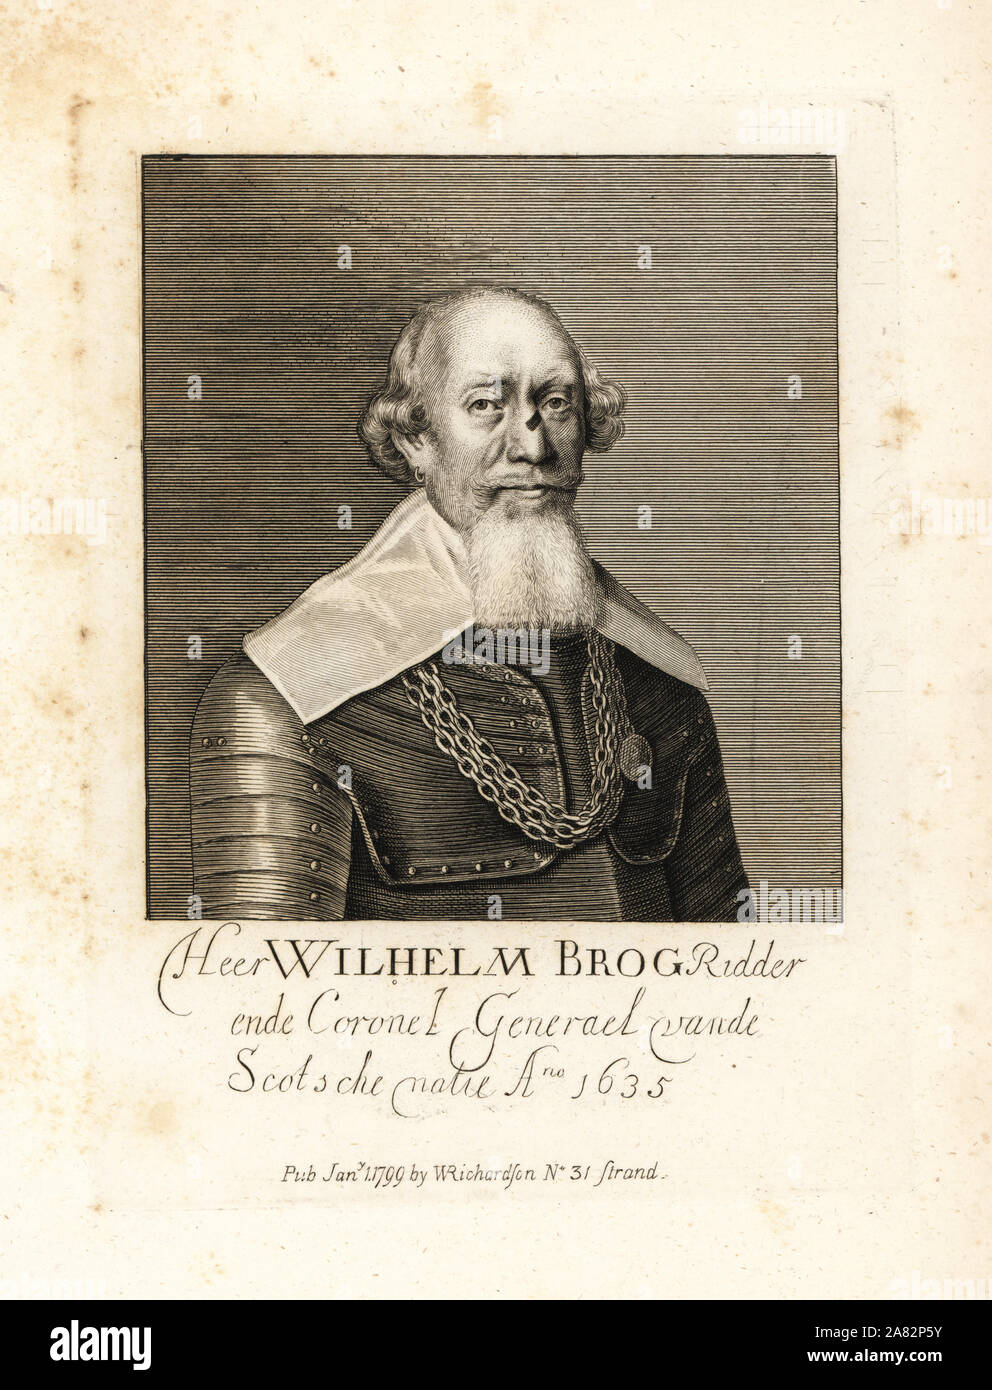 William or Wilhelm Brog, Colonel-General in the Scots-Dutch Brigade, Thirty Years War, 1635. Copperplate engraving from William Richardson's Portraits Illustrating Granger's Biographical History of England, London, 1792–1812. James Granger (1723–1776) was an English clergyman, biographer, and print collector. Stock Photo